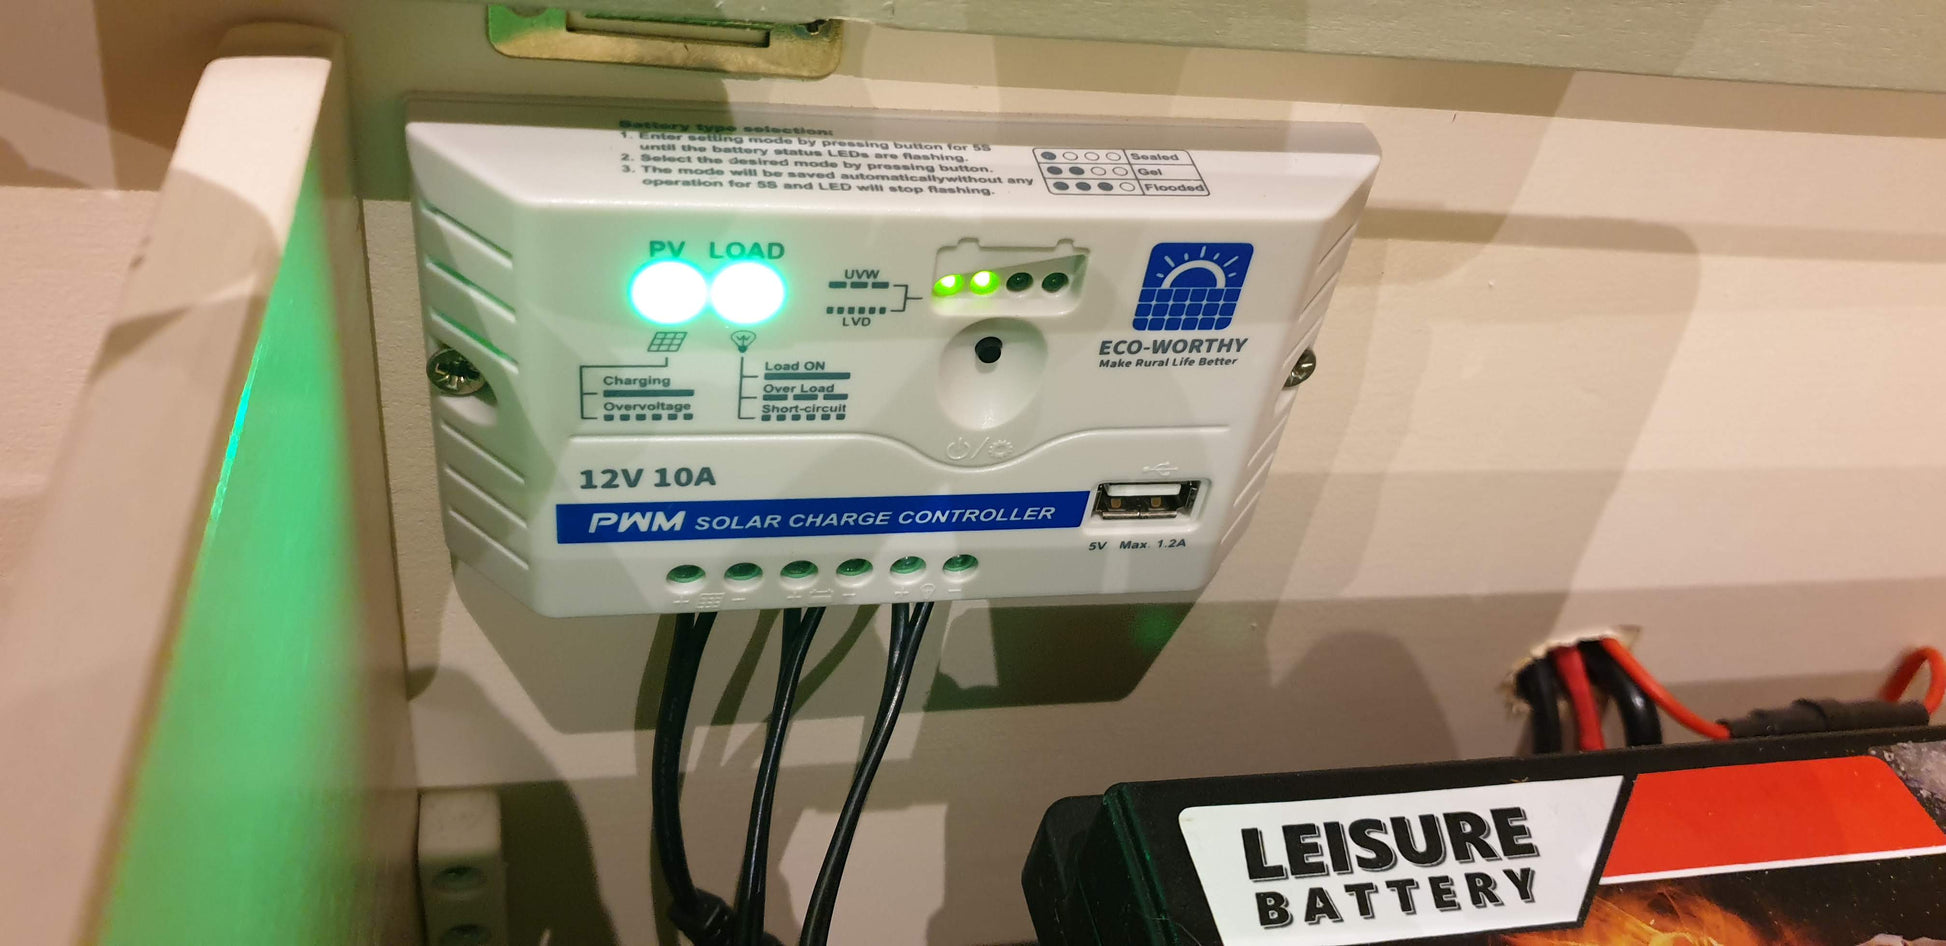 25W 12V 10A Solar Panel Kit with Leisure Battery Charge Controller with one additional USB socket